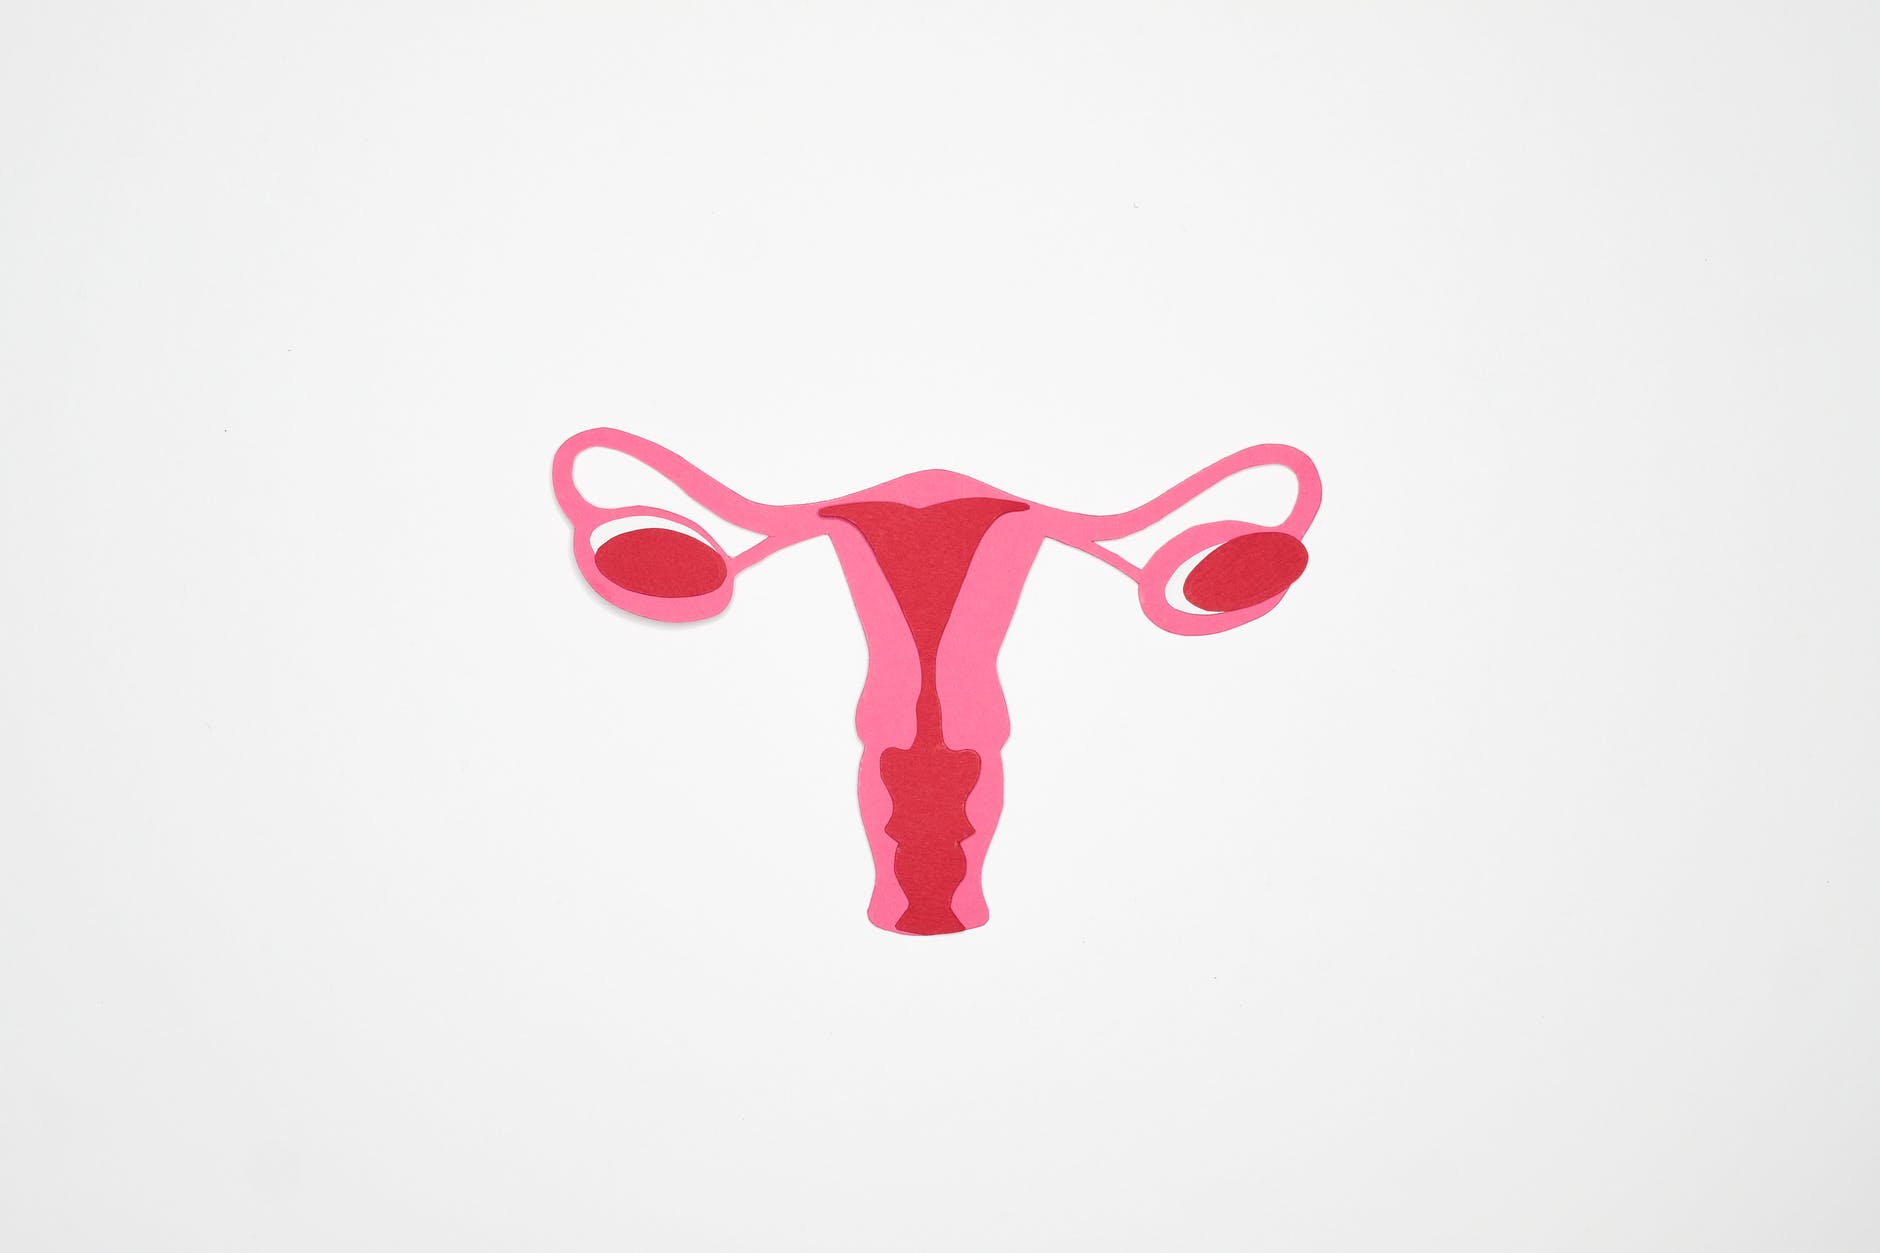 graphic art of a woman s ovary pcos one of the health conditions that cause weight gain